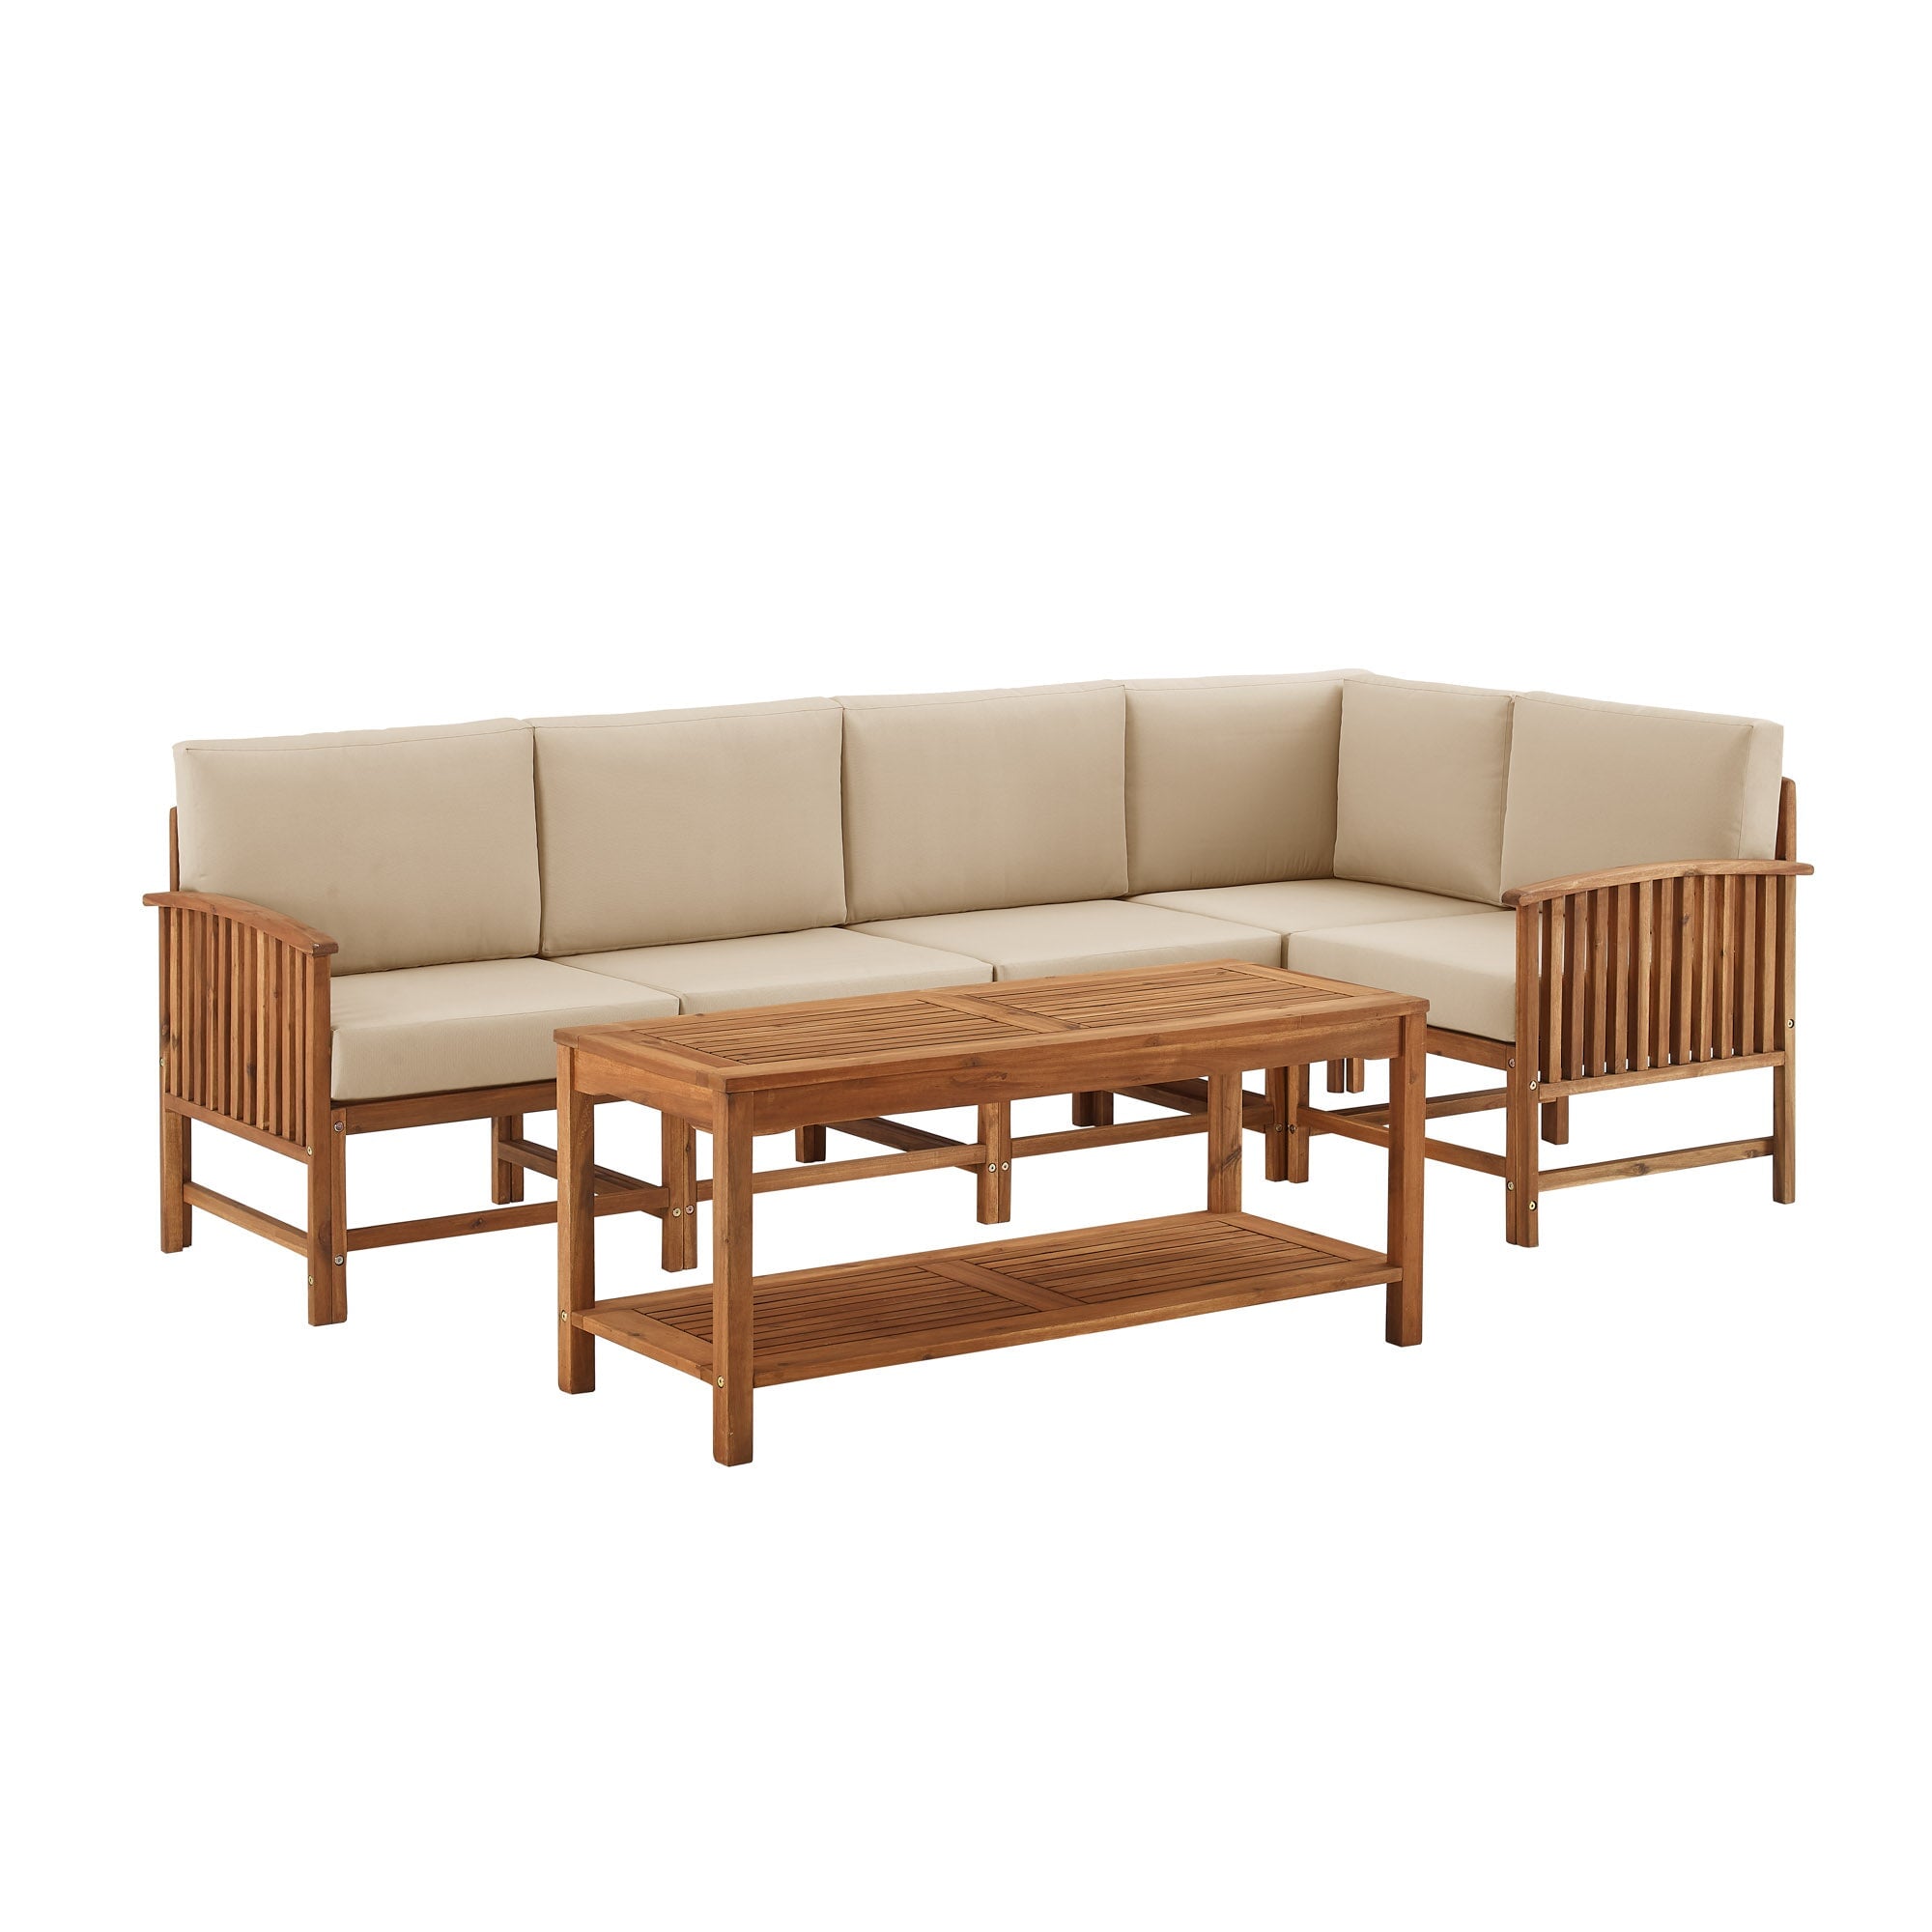 Walker Edison Midland 6-Piece Transitional Slatted Acacia Outdoor Corner Sectional with Coffee Table